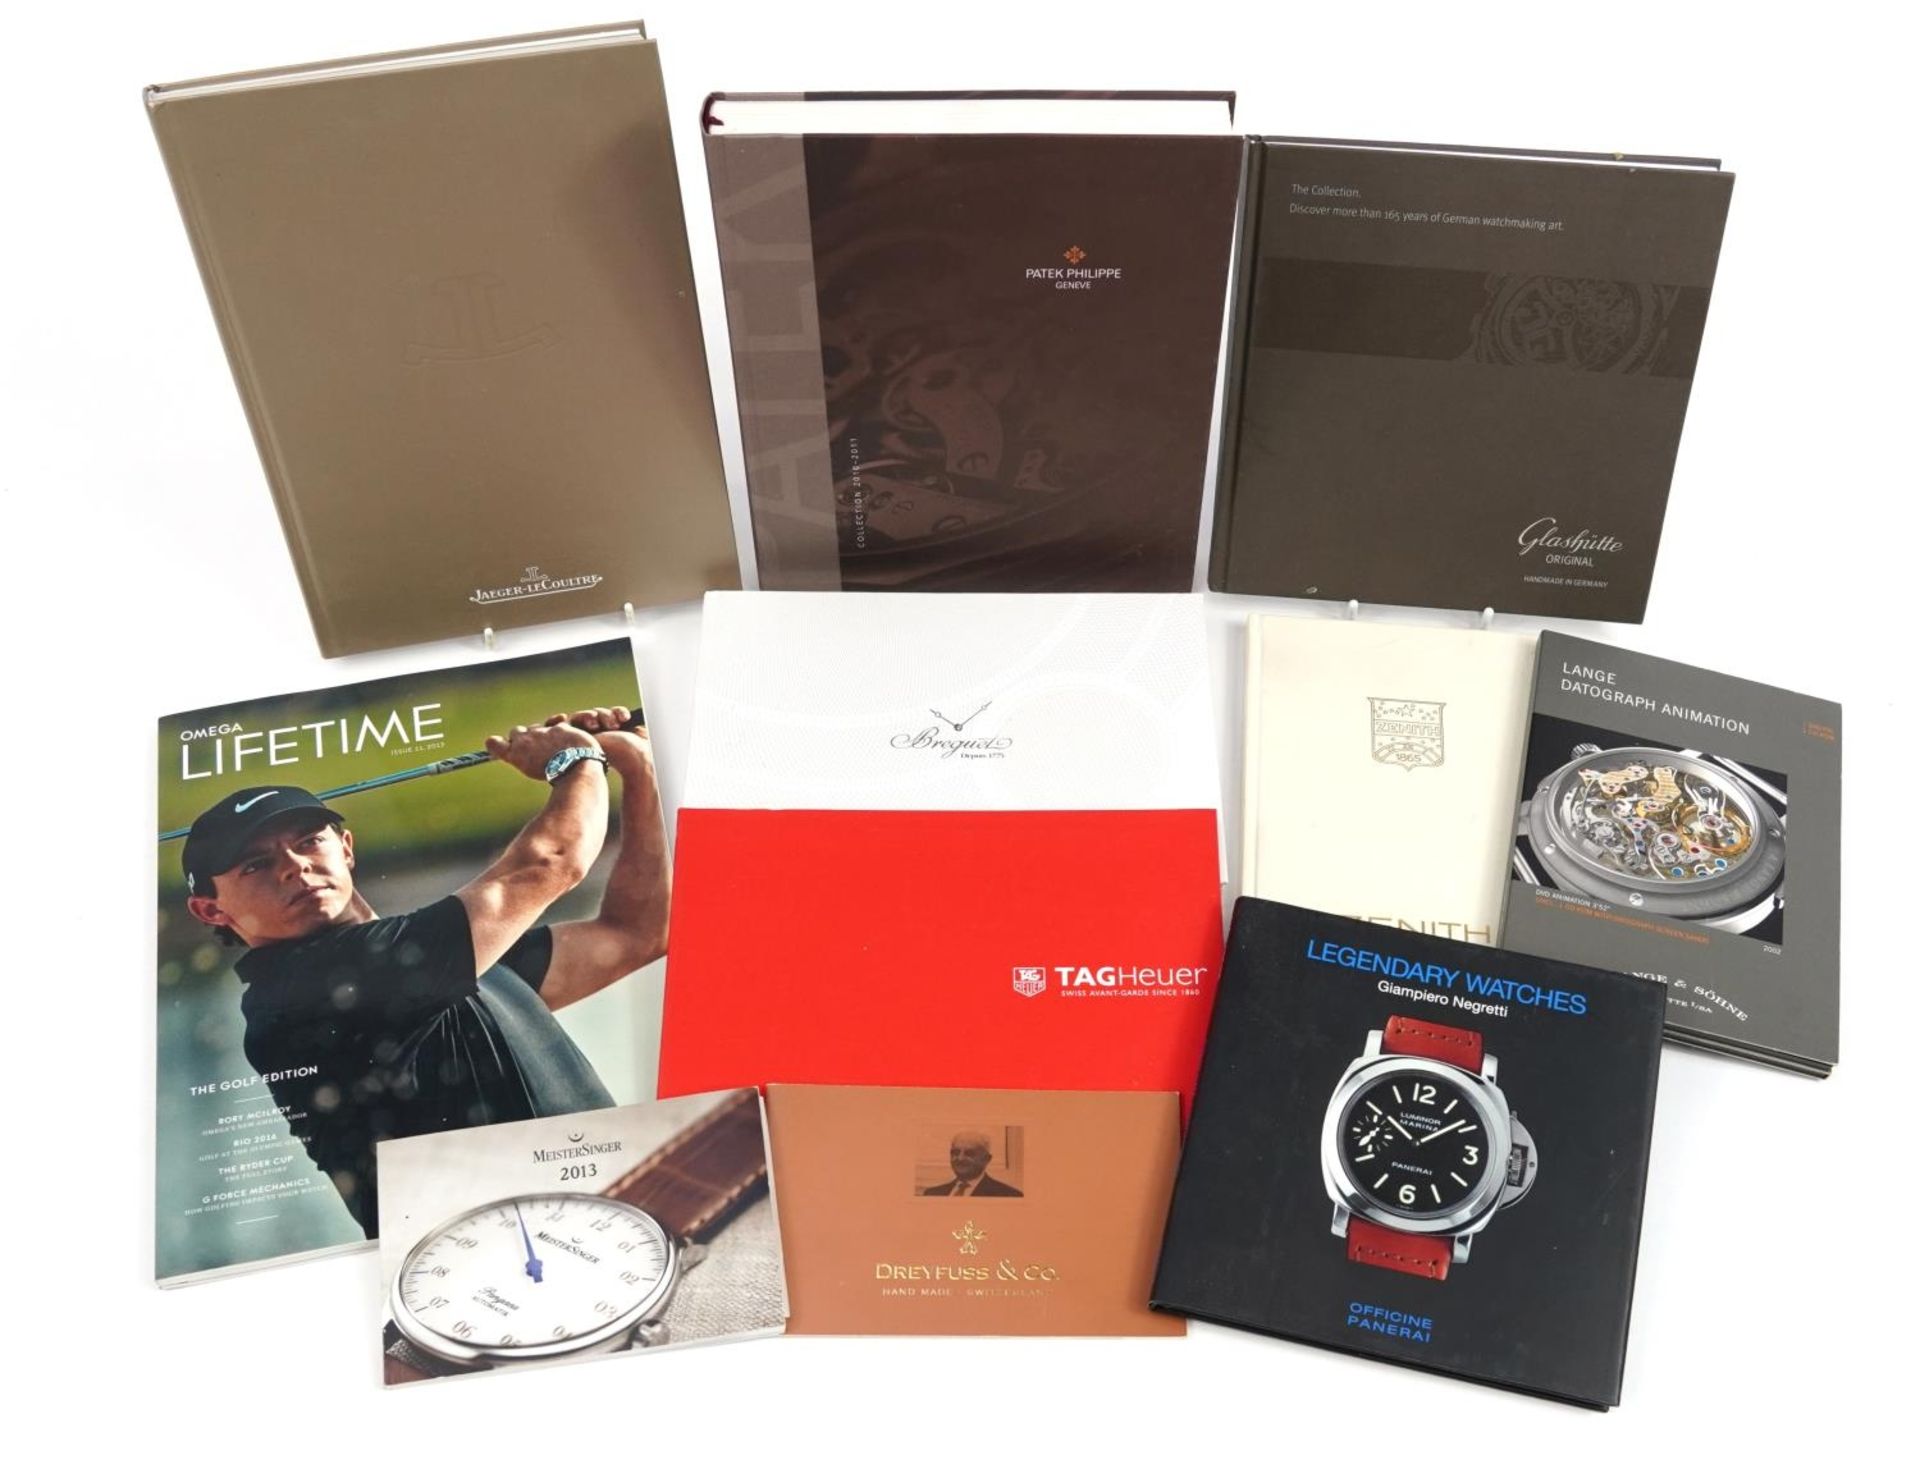 Watch related reference books including Jaeger-LeCoultre, Omega and Patek Philippe - Image 3 of 3